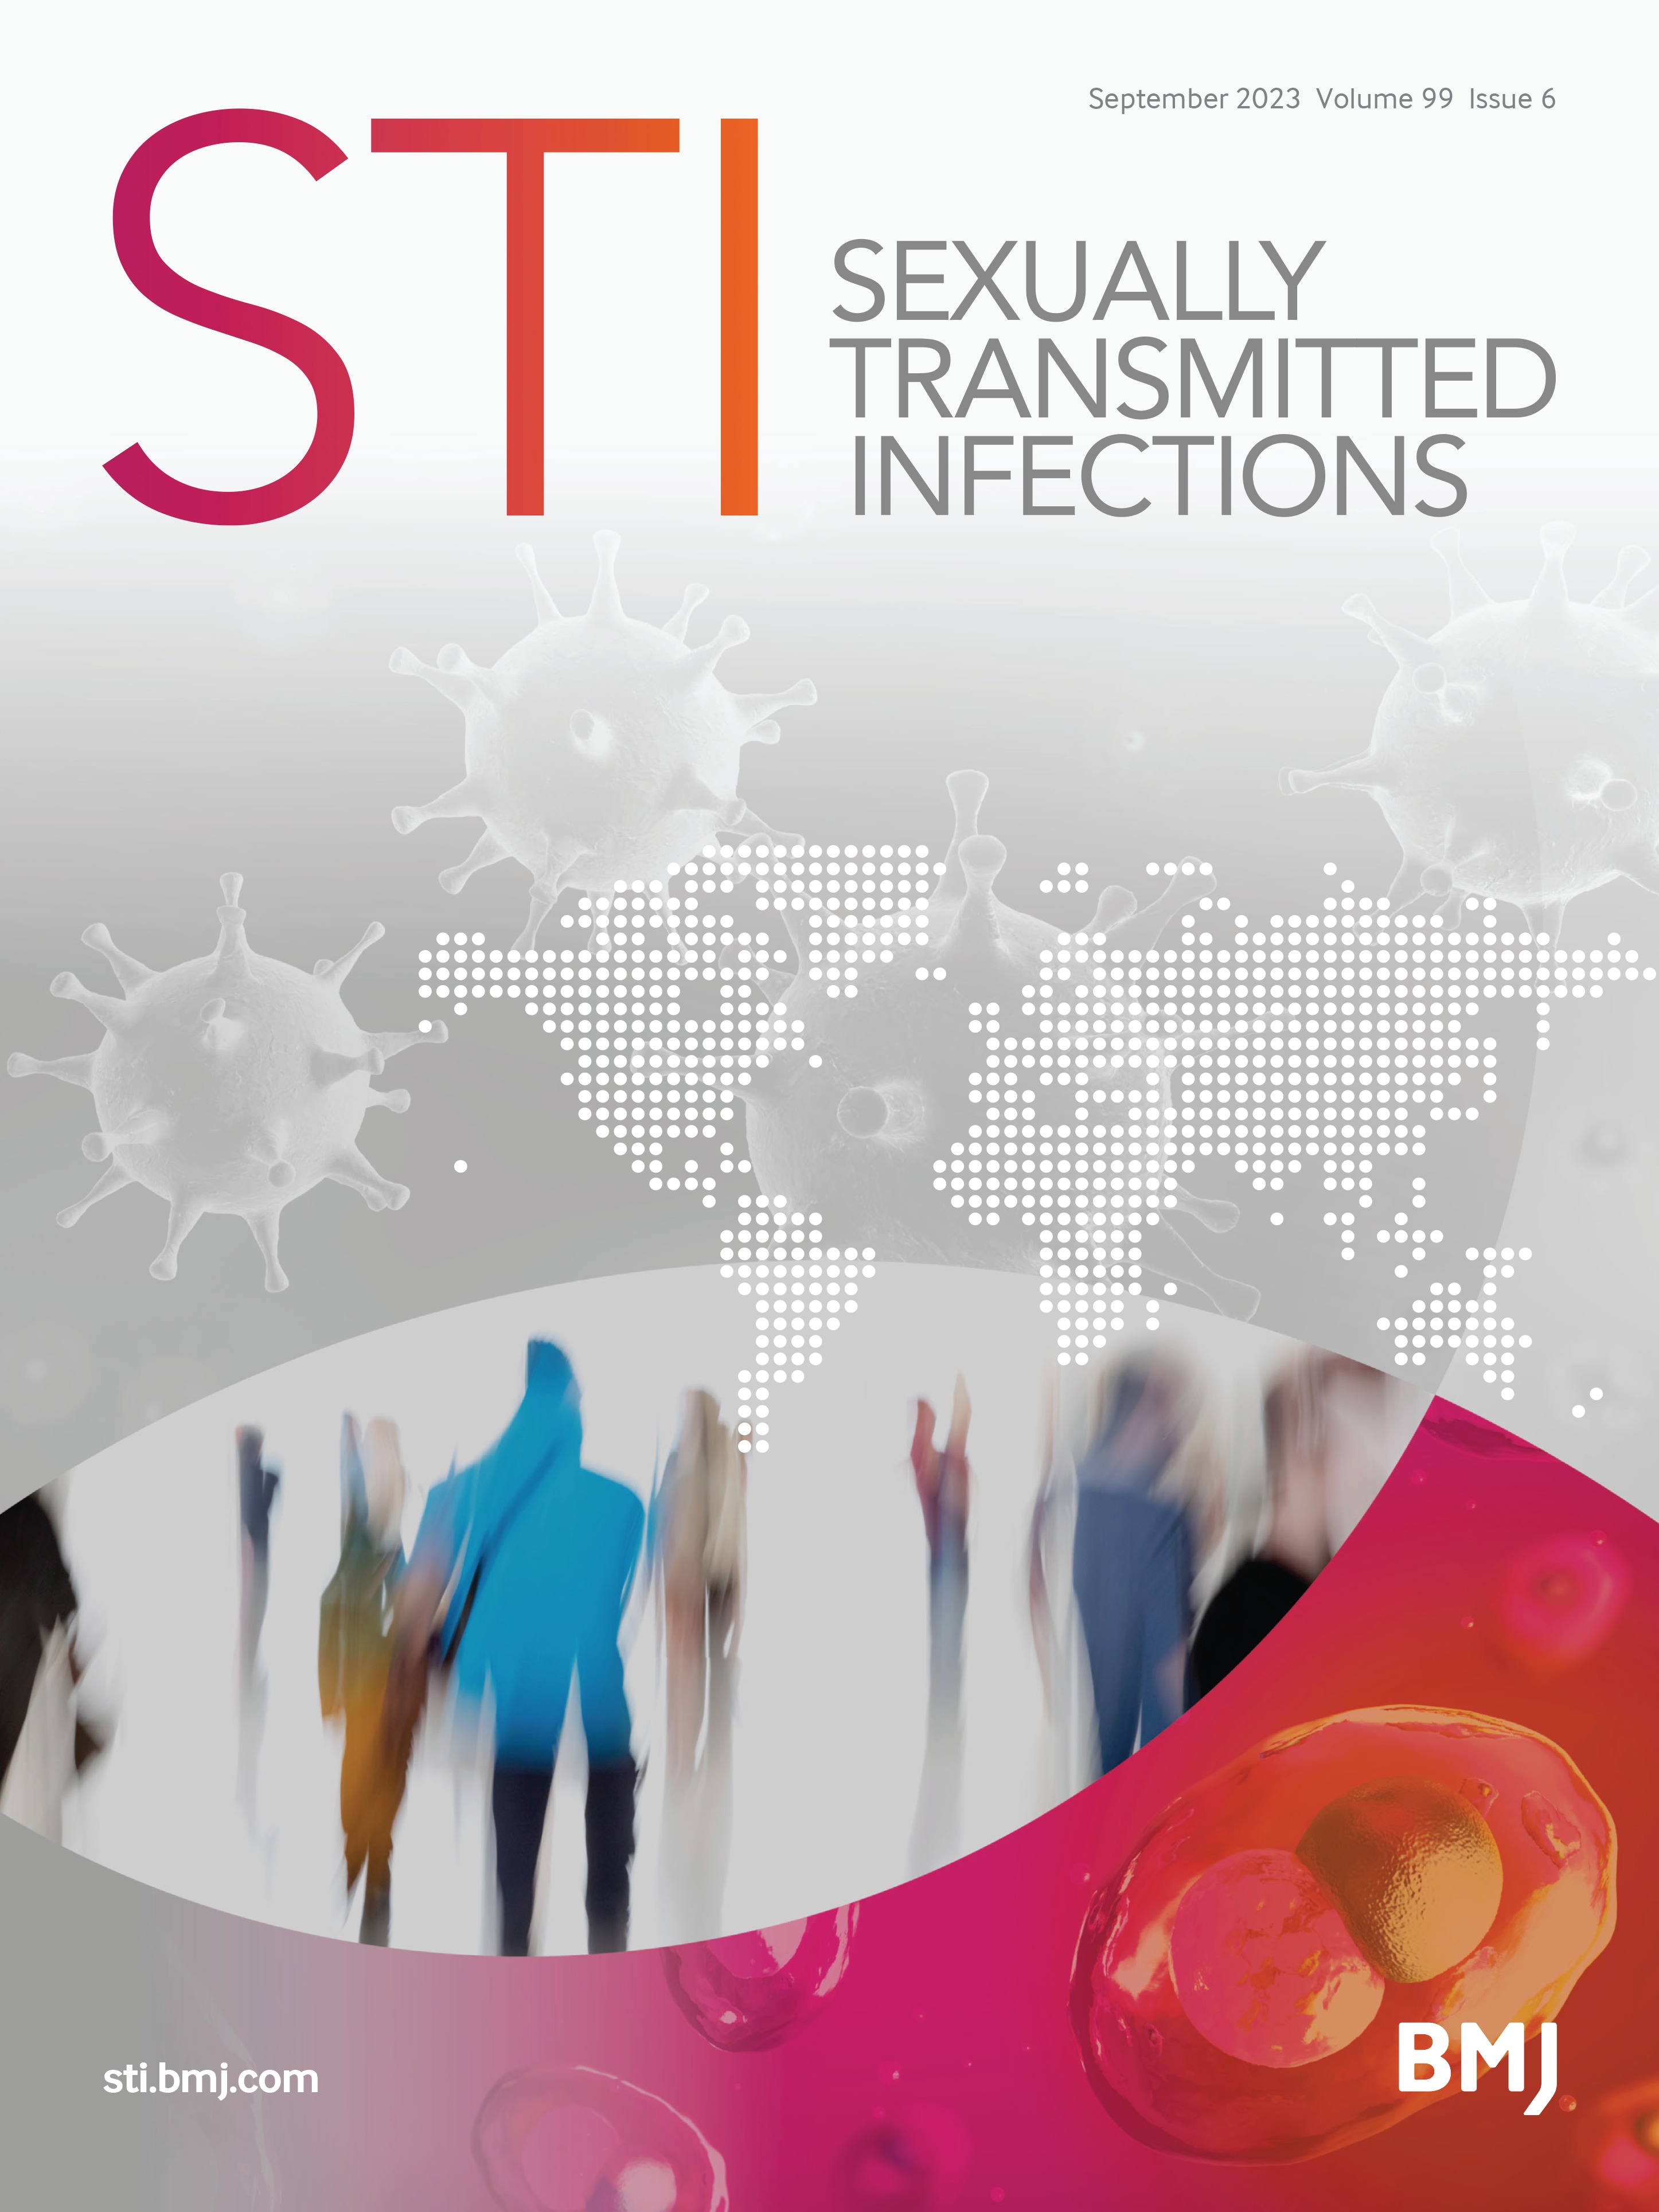 Promoting sexually transmitted infection (STI) prophylaxis and community resource sharing in medical student-run clinics